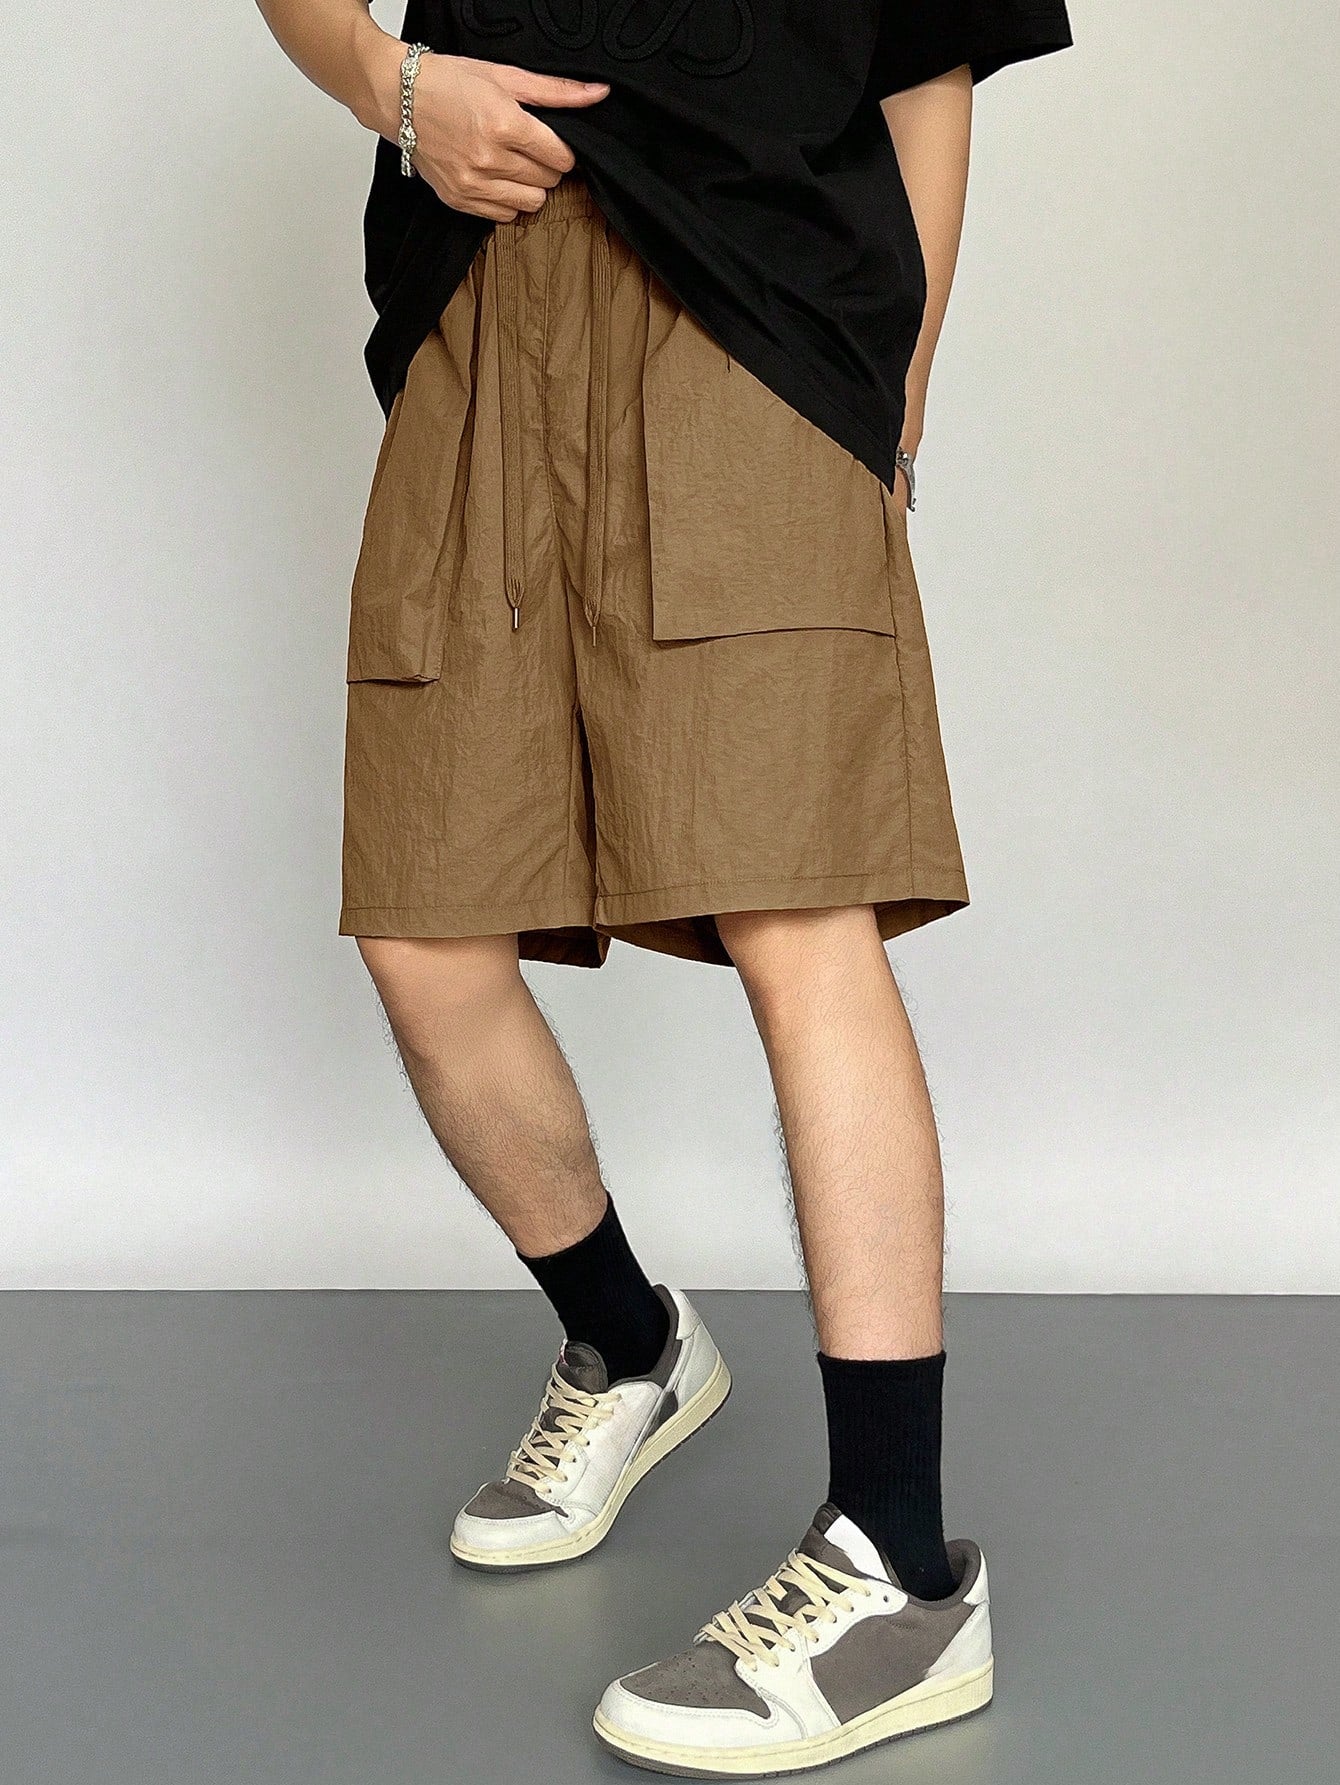 Men Solid Color Drawstring Casual Shorts With Pockets For Summer